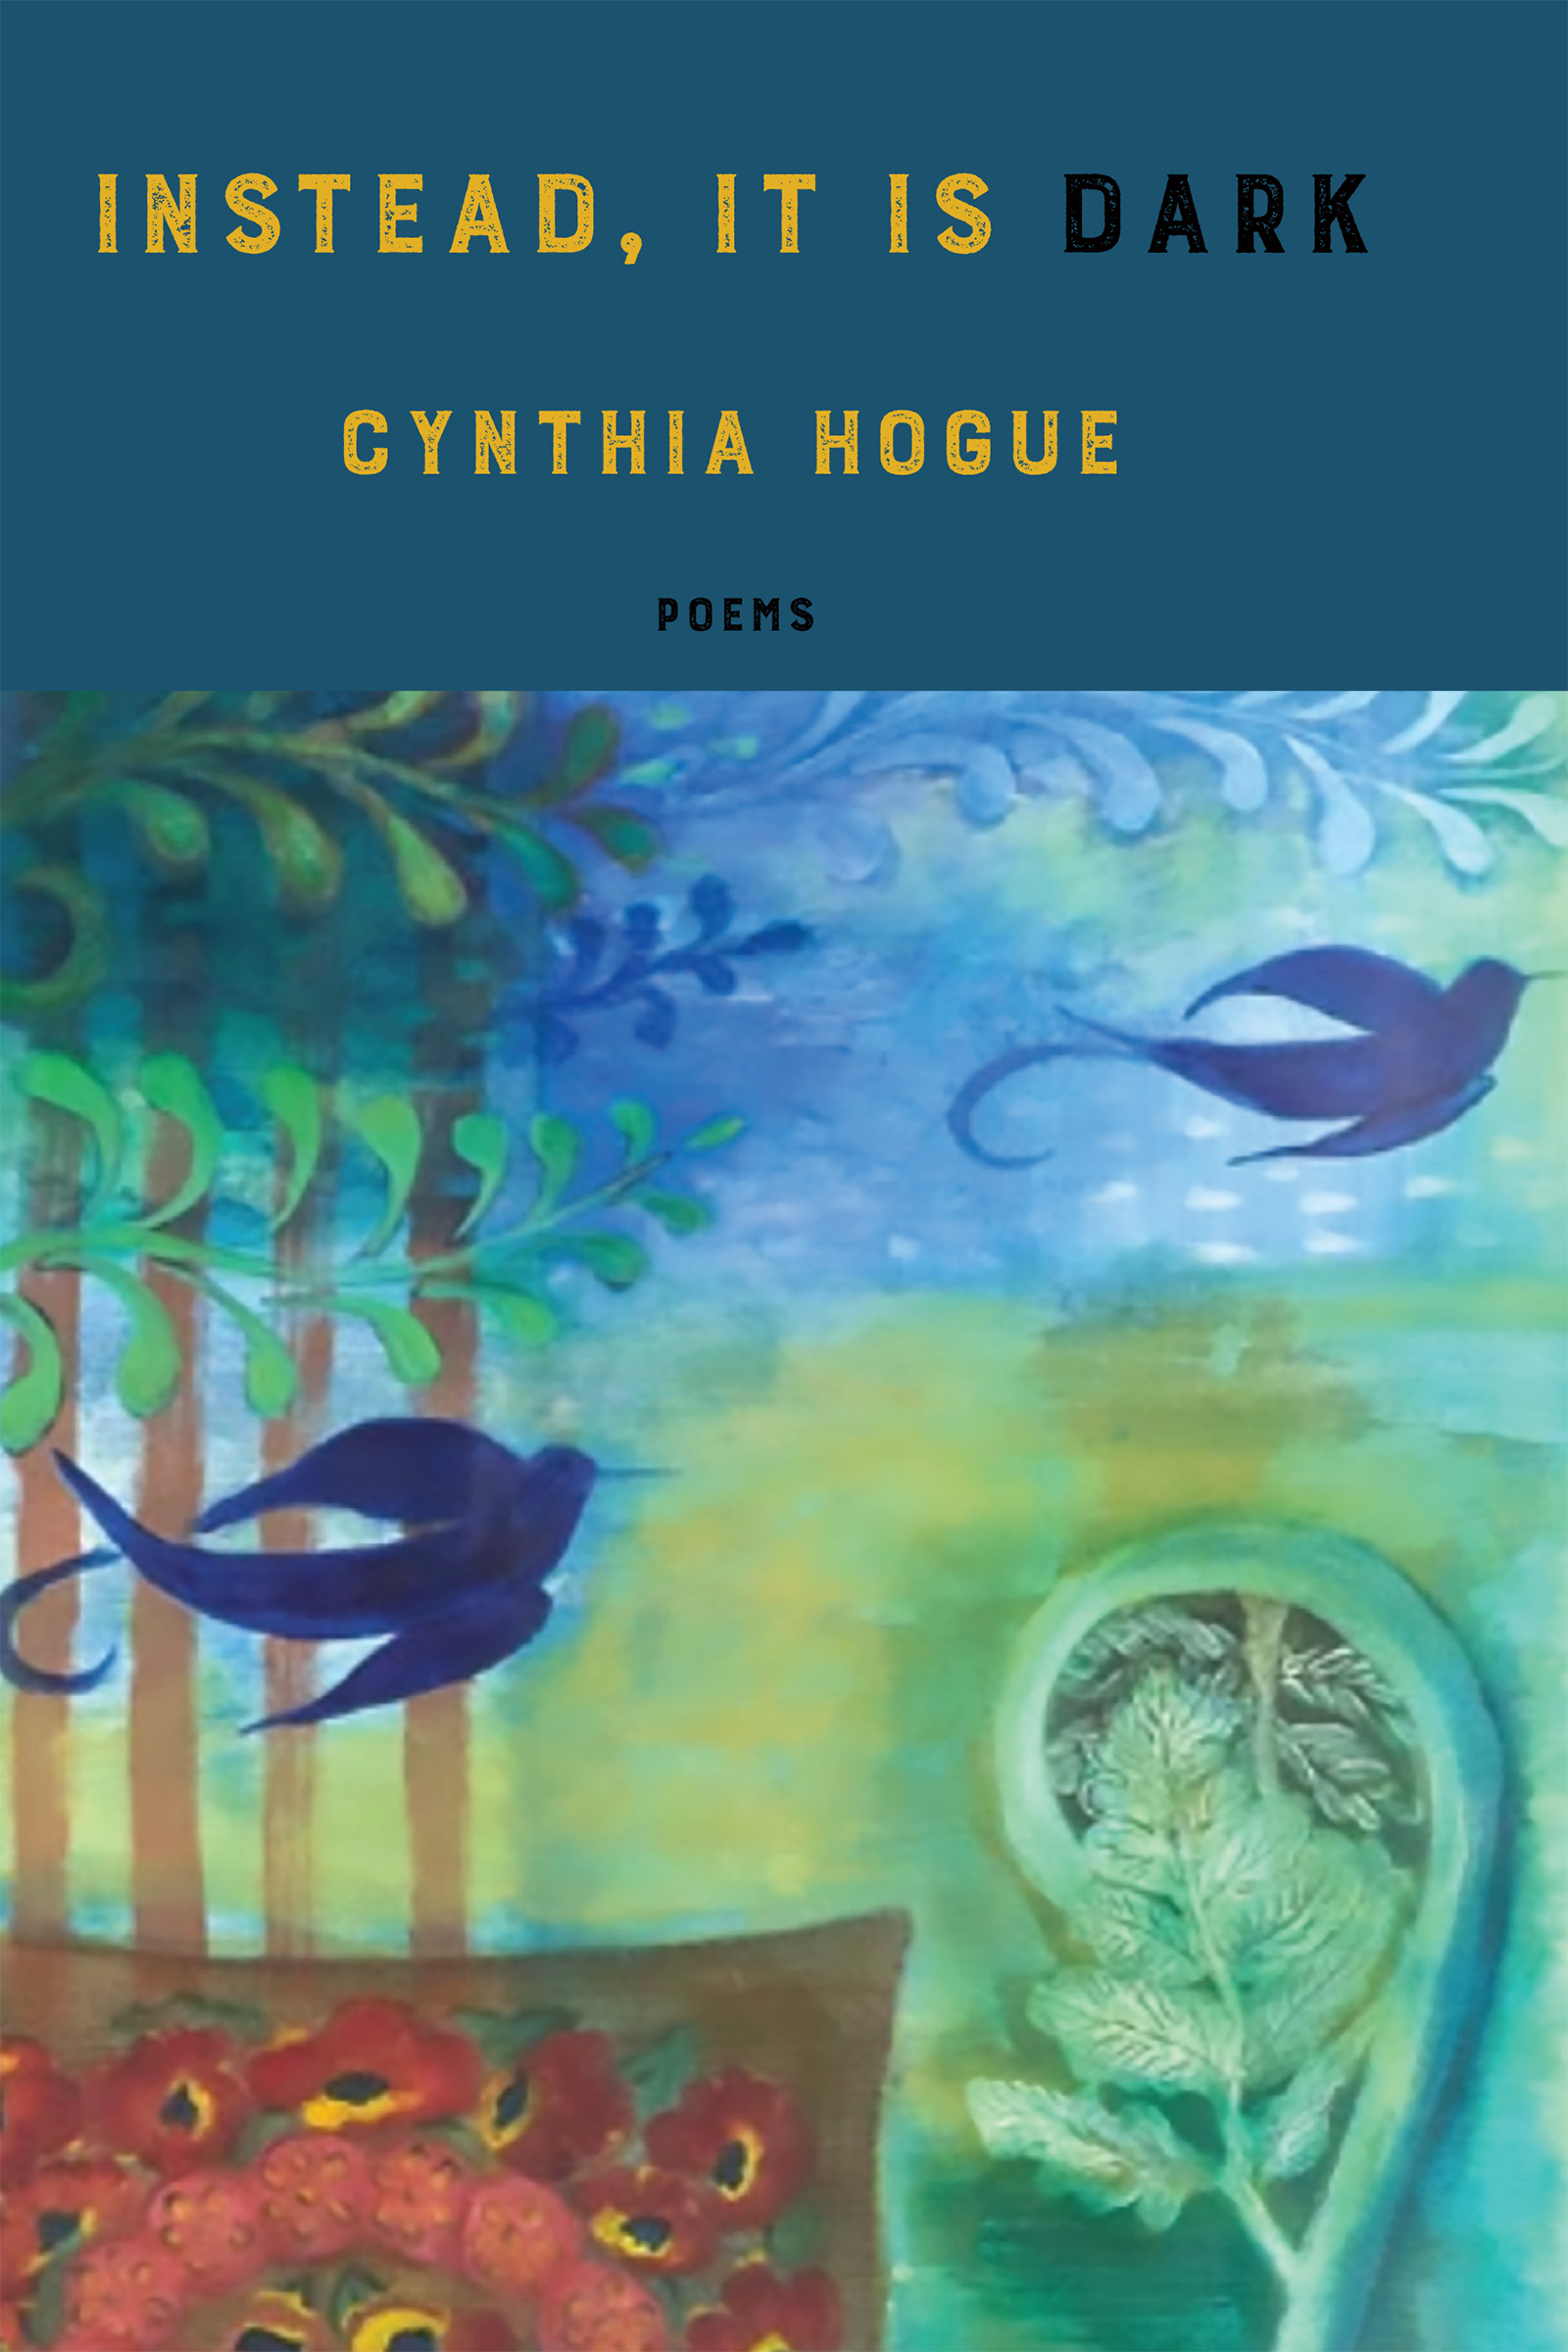 Two blue birds fly through trees in an abstract forest above red poppies and a curled green tree. Above the image is written the title instead, it is dark by Cynthia Hogue